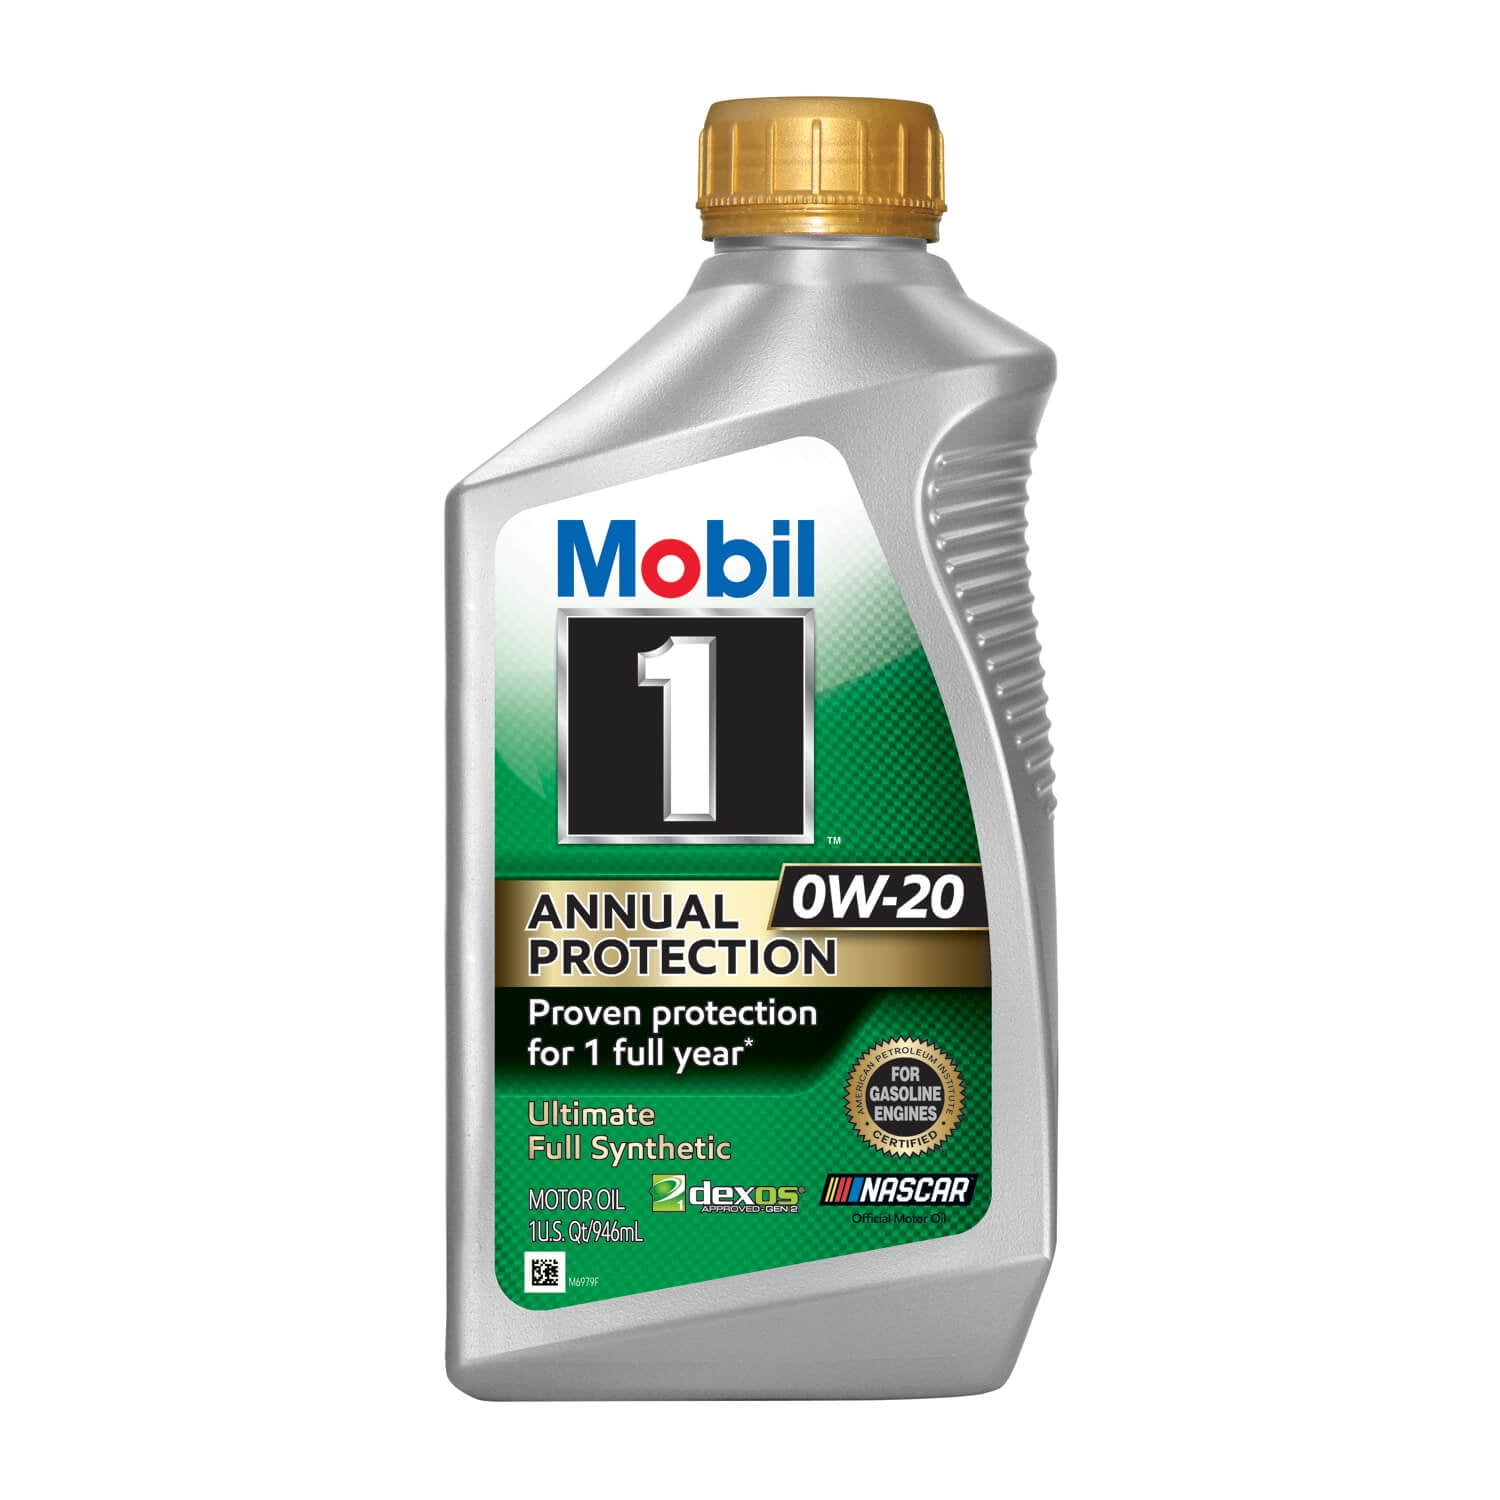 Масло мобил 0w20. Mobil 1 Full Synthetic 5w-30. 5w 30 mobil 1 Full Synthetic 1 lt. Mobil Full Synthetic 0w-20. Mobil Full Synthetic 5w-20.